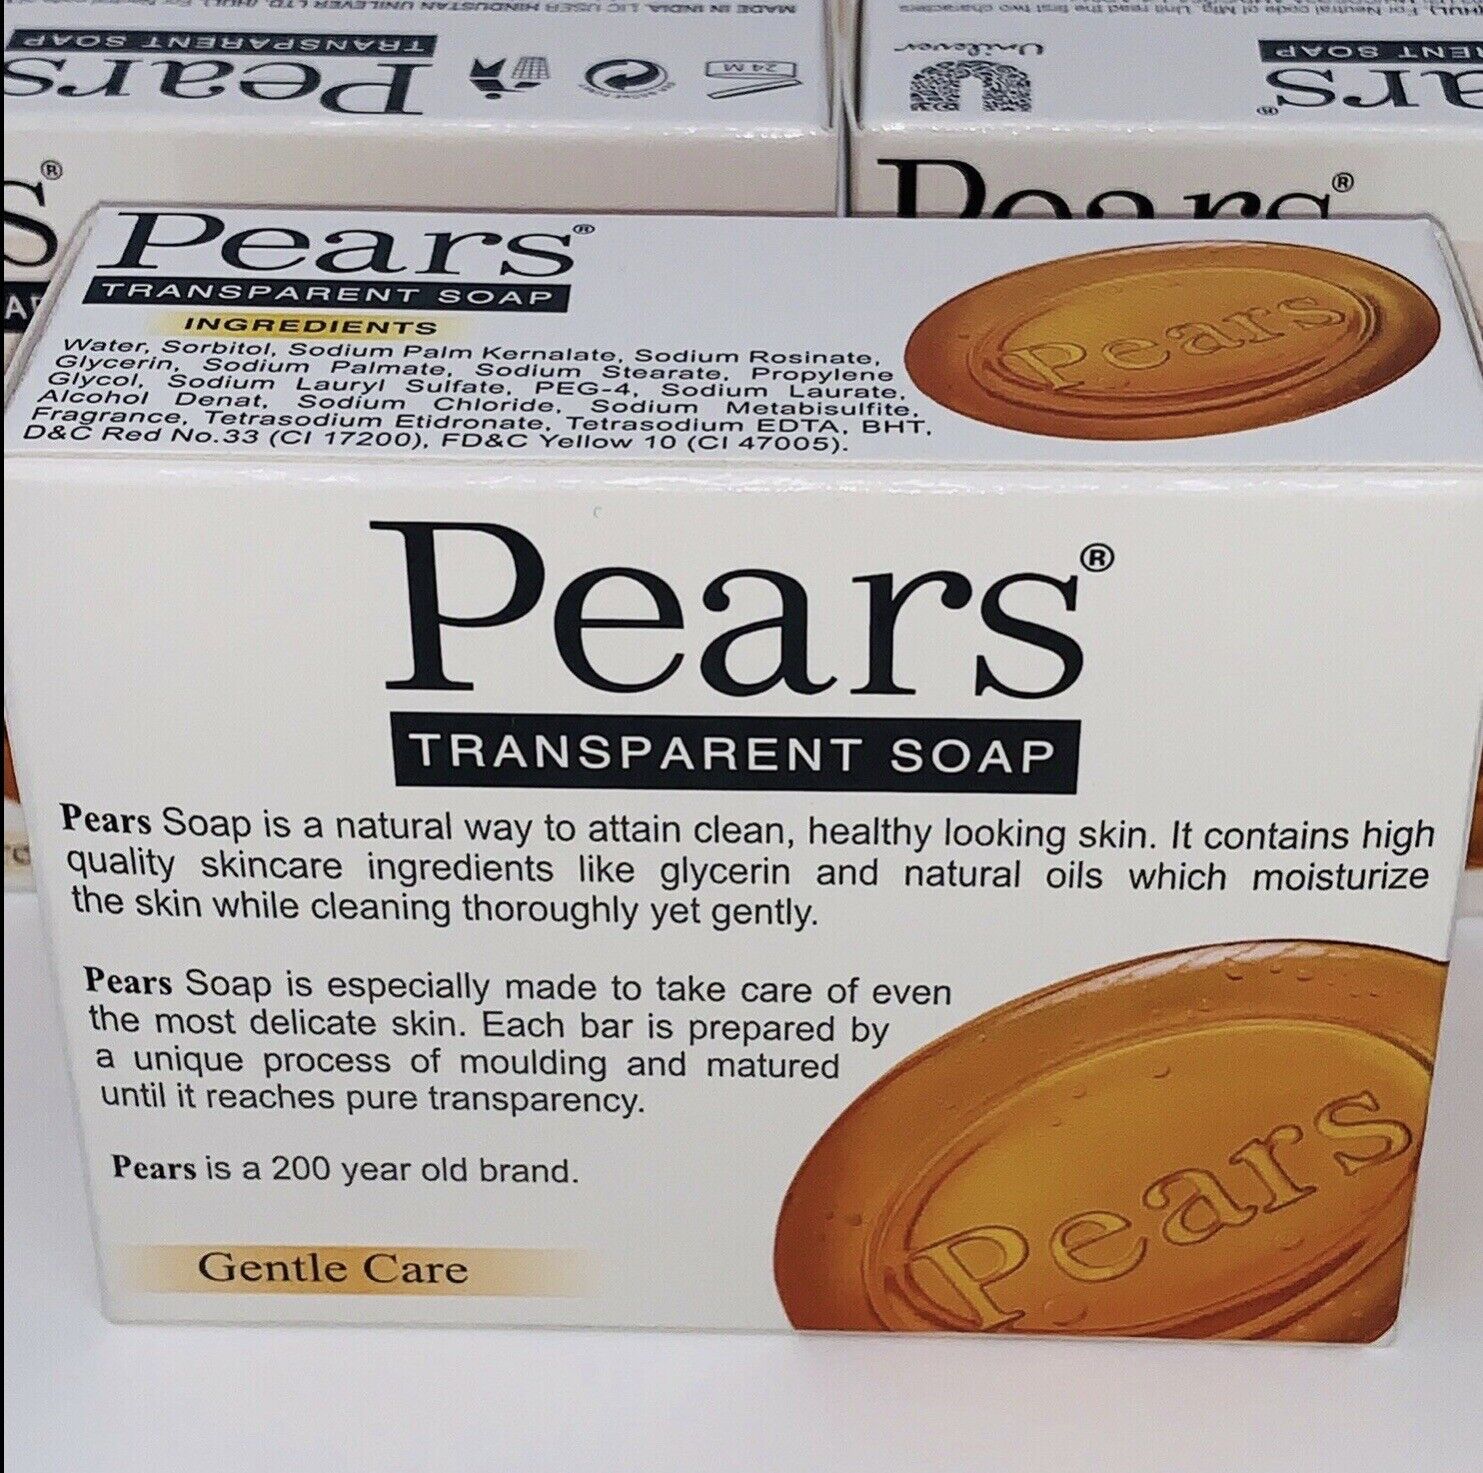 Pears Transparent Glycerin Soap Bars - 3 pack